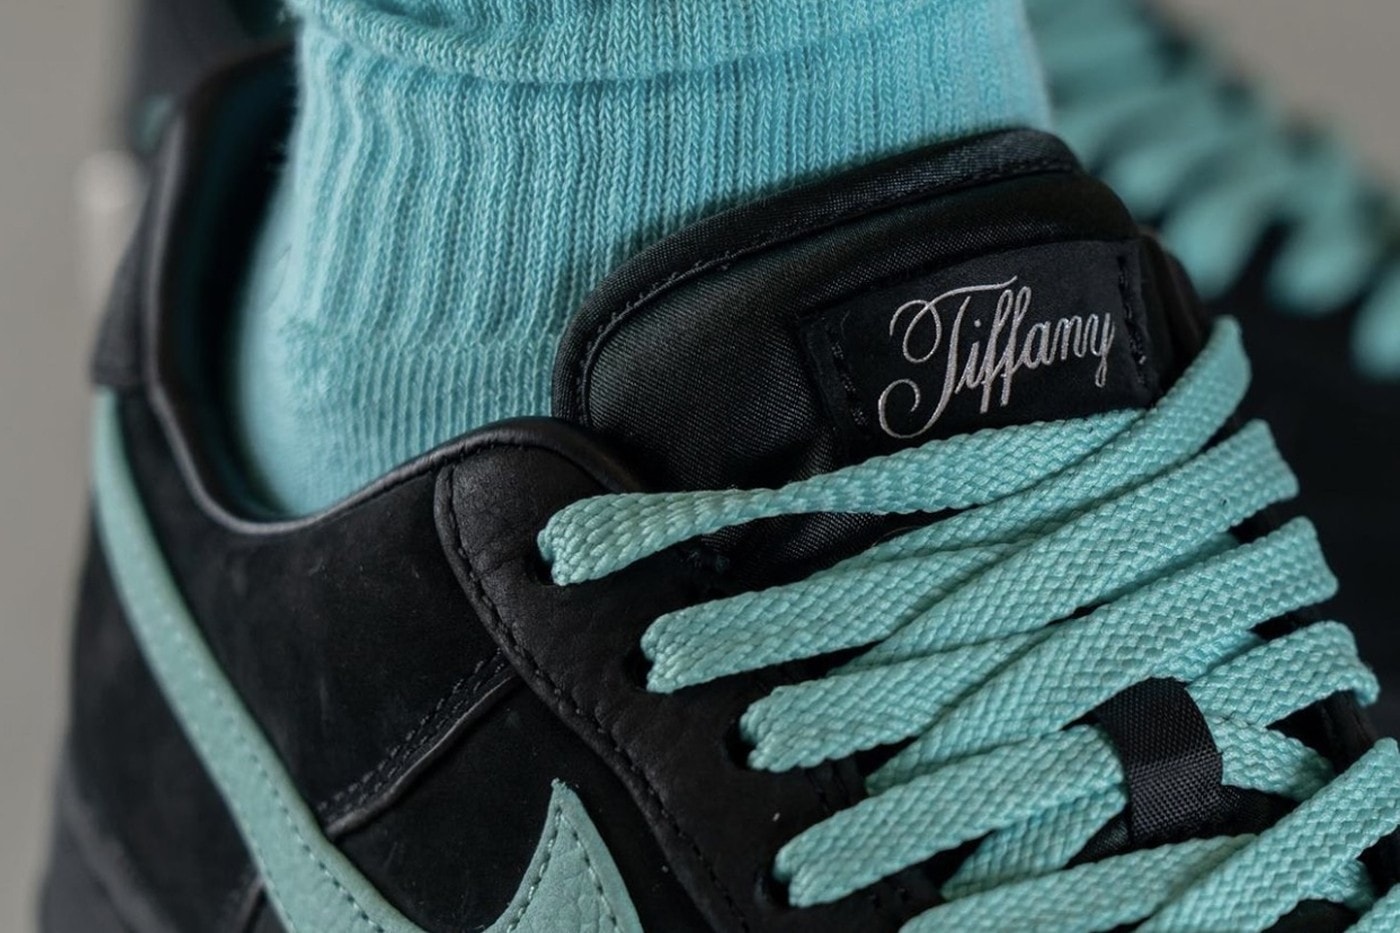 Tiffany & Co. x Nike Air Force 1 Low collaboration on feet look